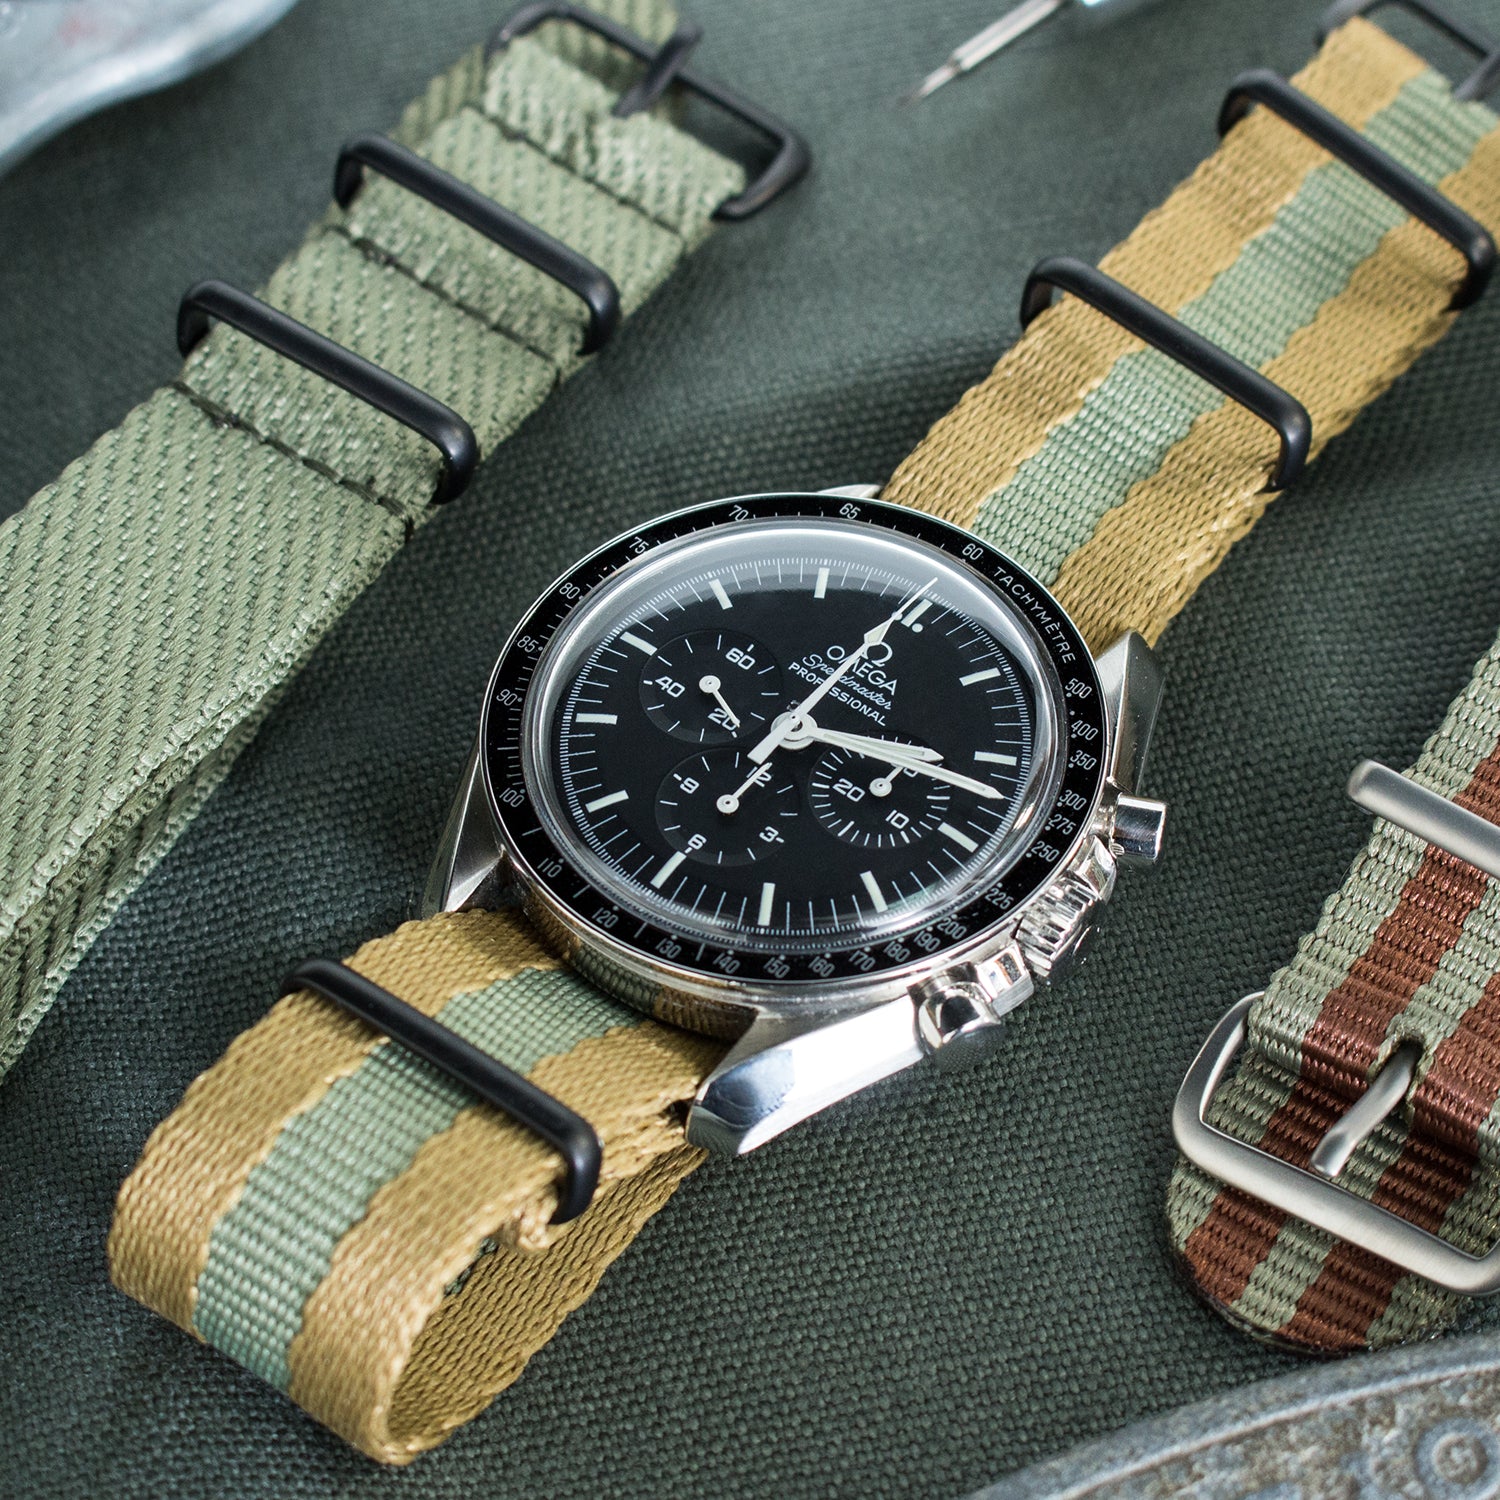 Omega Speedmaster Professional Chronograph Moon watch band by Strapcode